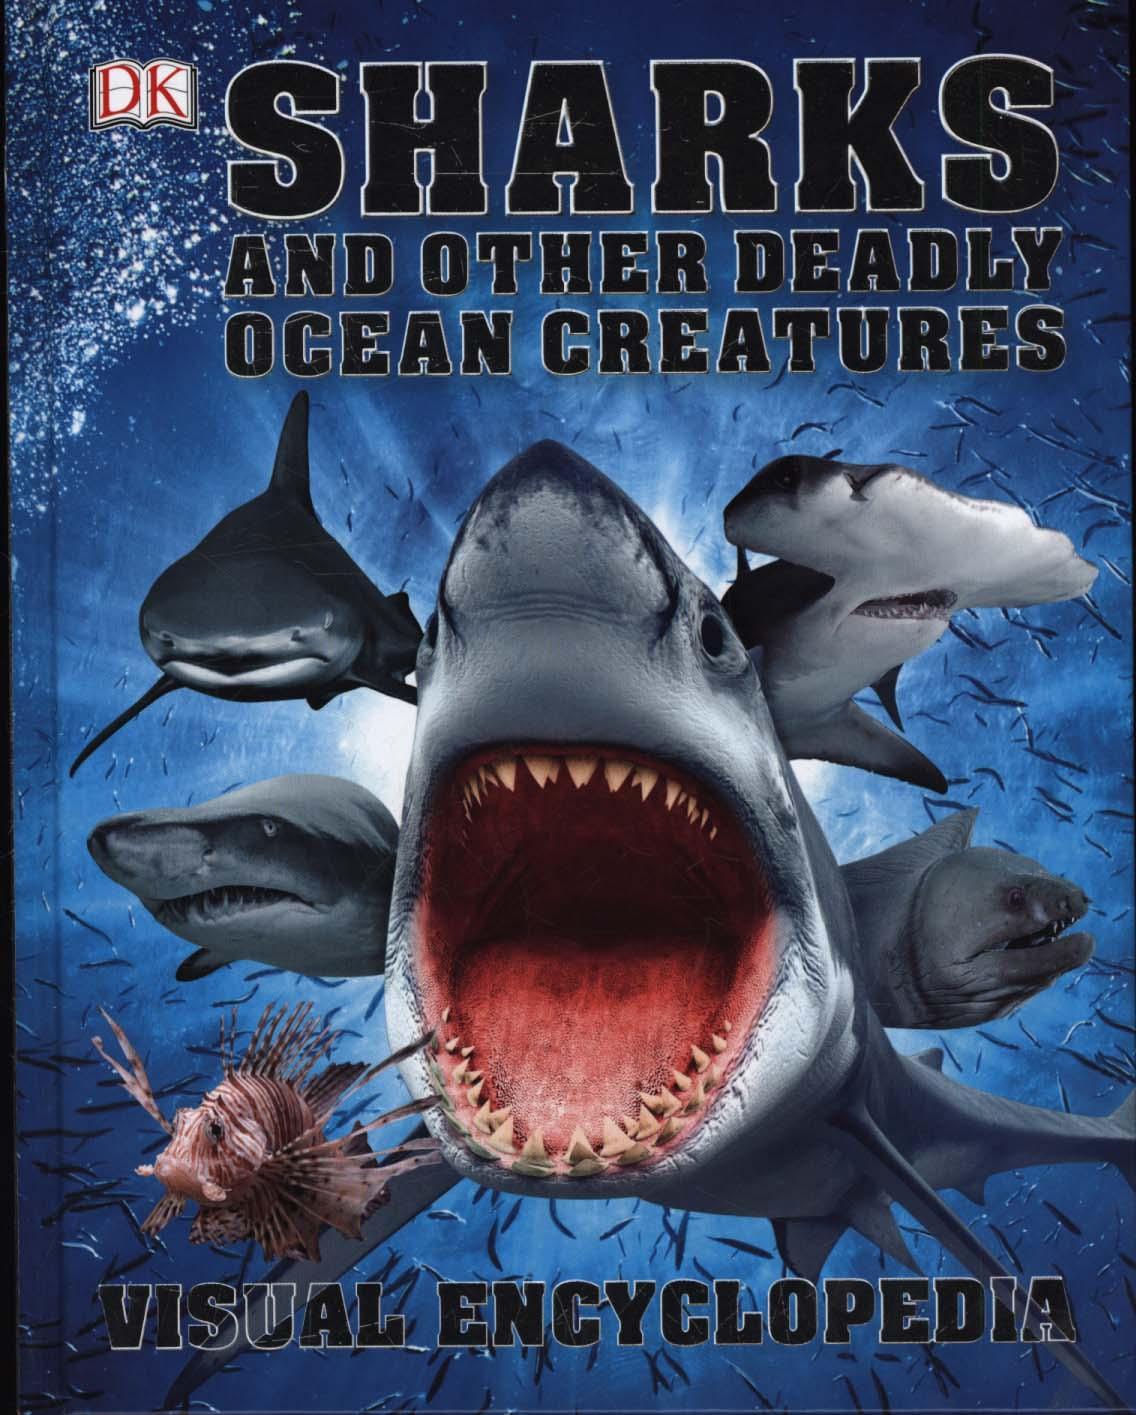 Sharks and Other Deadly Ocean Creatures -  DK